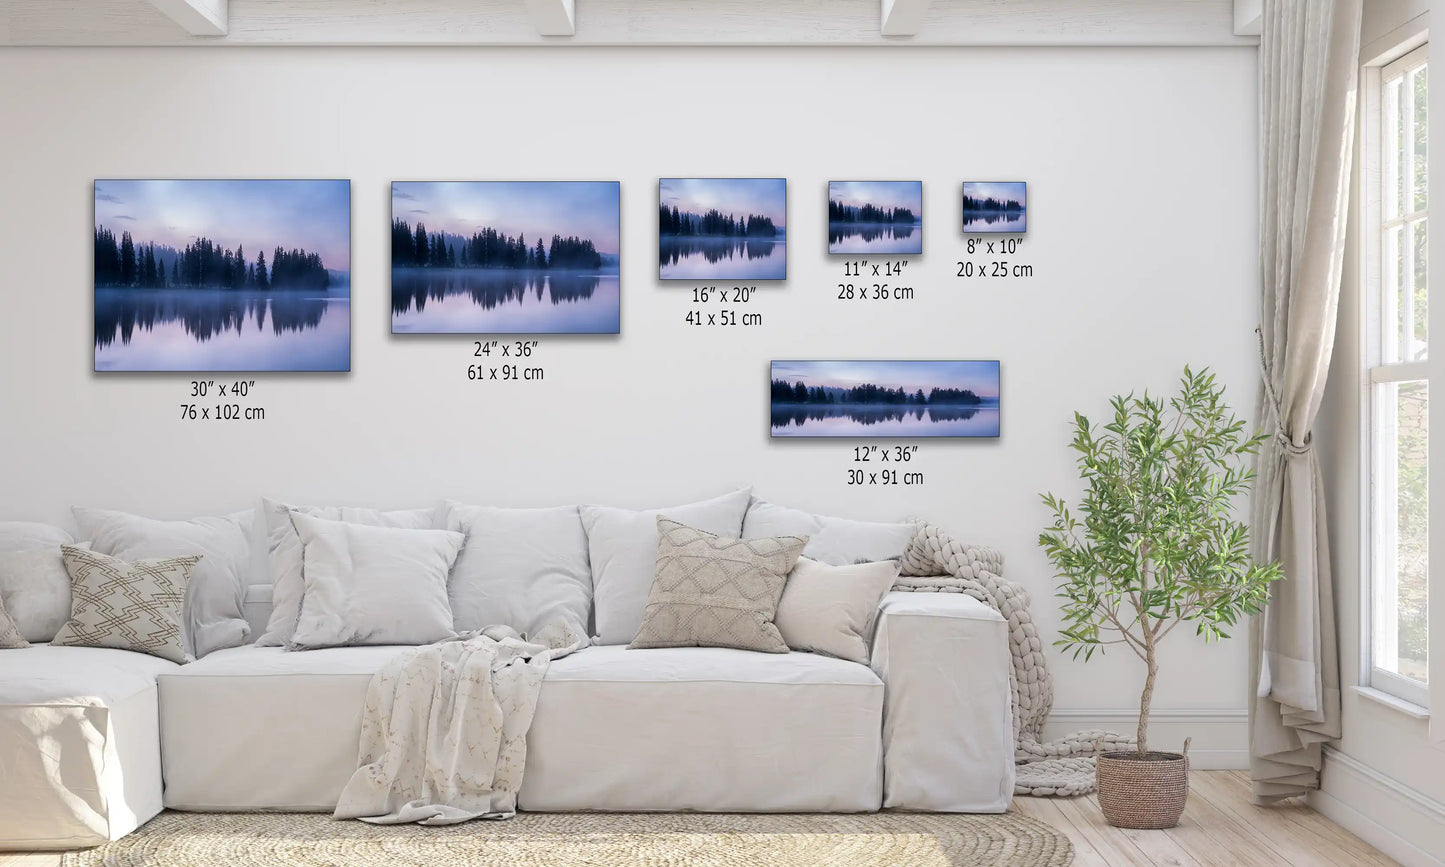 Diagram showing various sizes of wall art prints of Yellowstone Lake's twilight reflection, from small to large, for different room settings.